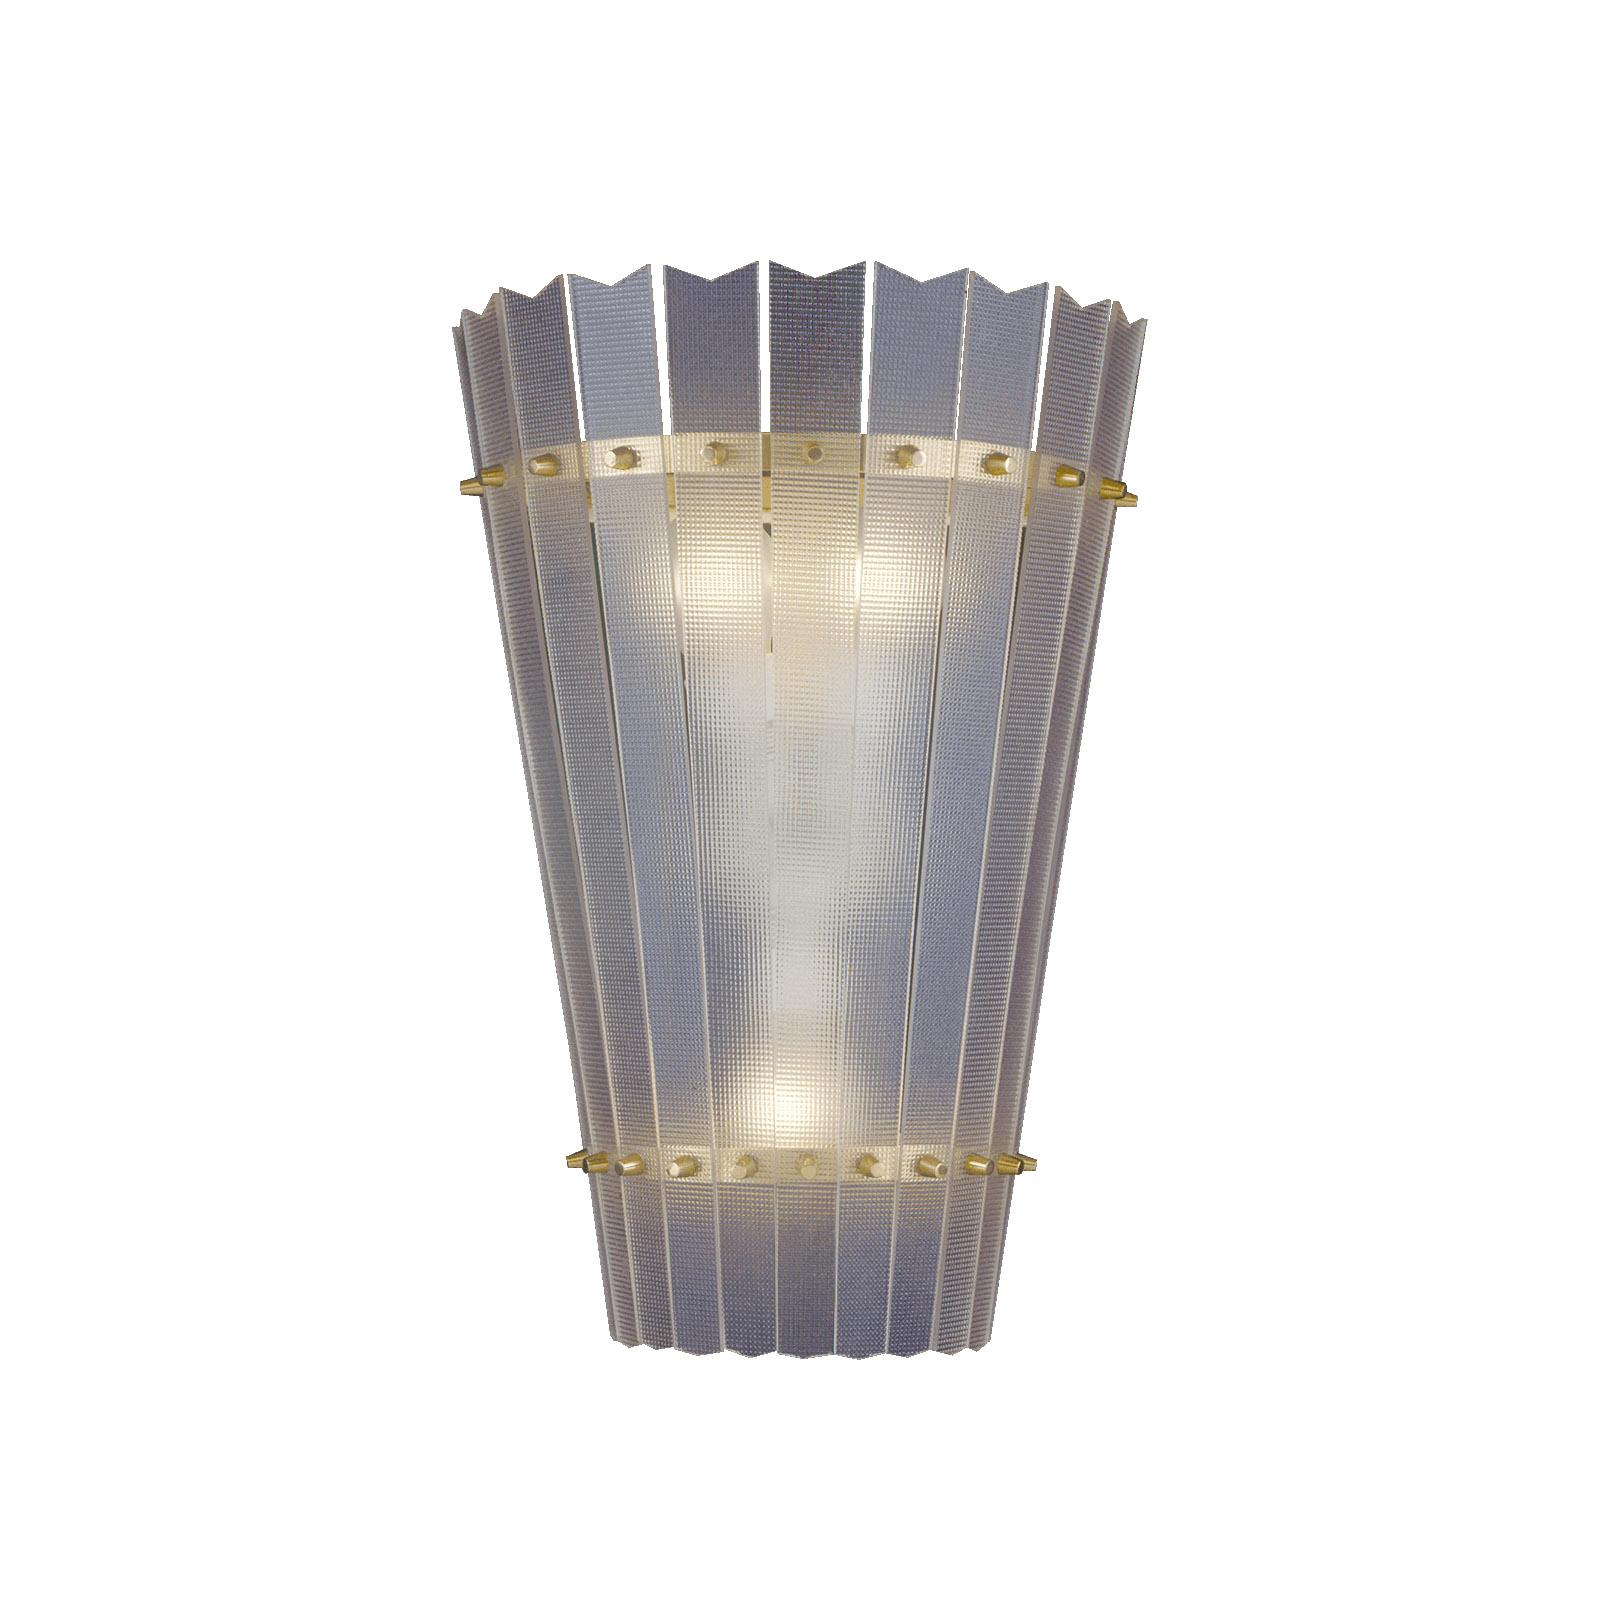 A very extravagant wall-lamp with textured acrylic shade.

Most components according to the UL regulations, with an additional charge we will UL-list and label our fixtures.